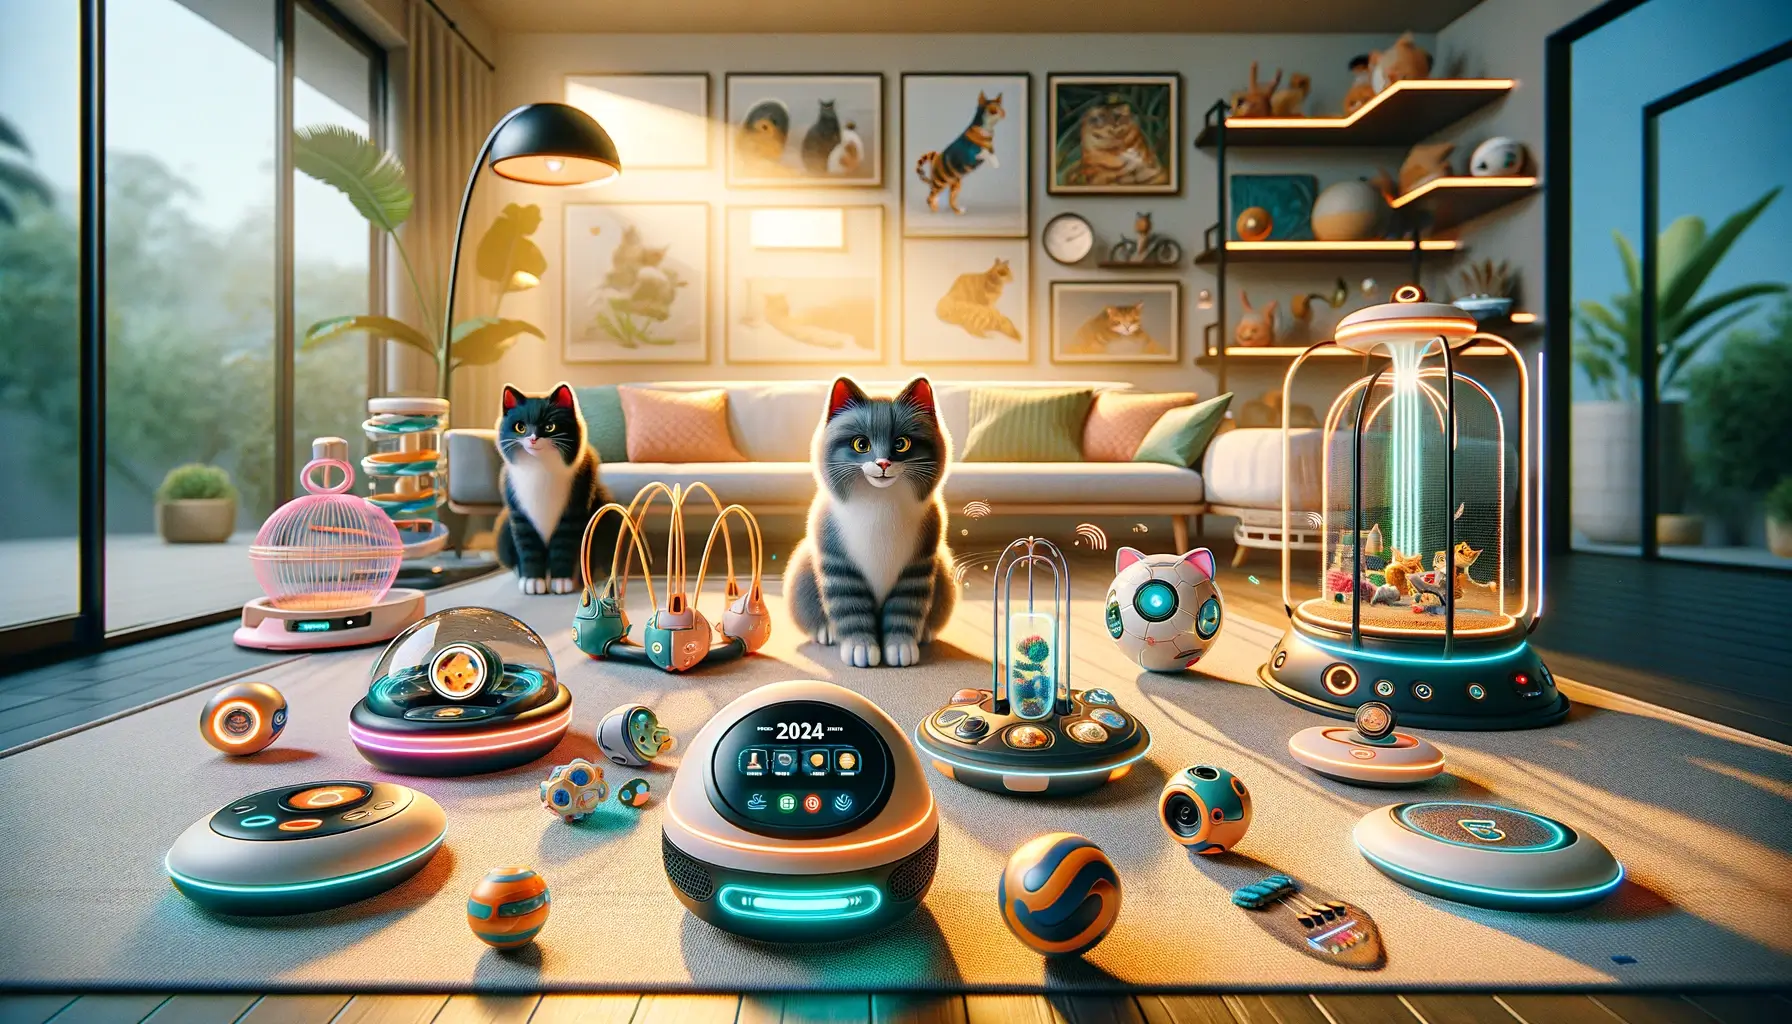 A collection of the top 5 innovative cat toys of 2024 displayed in a sunny, modern living room, with playful cats engaging with high-tech gadgets and interactive devices.